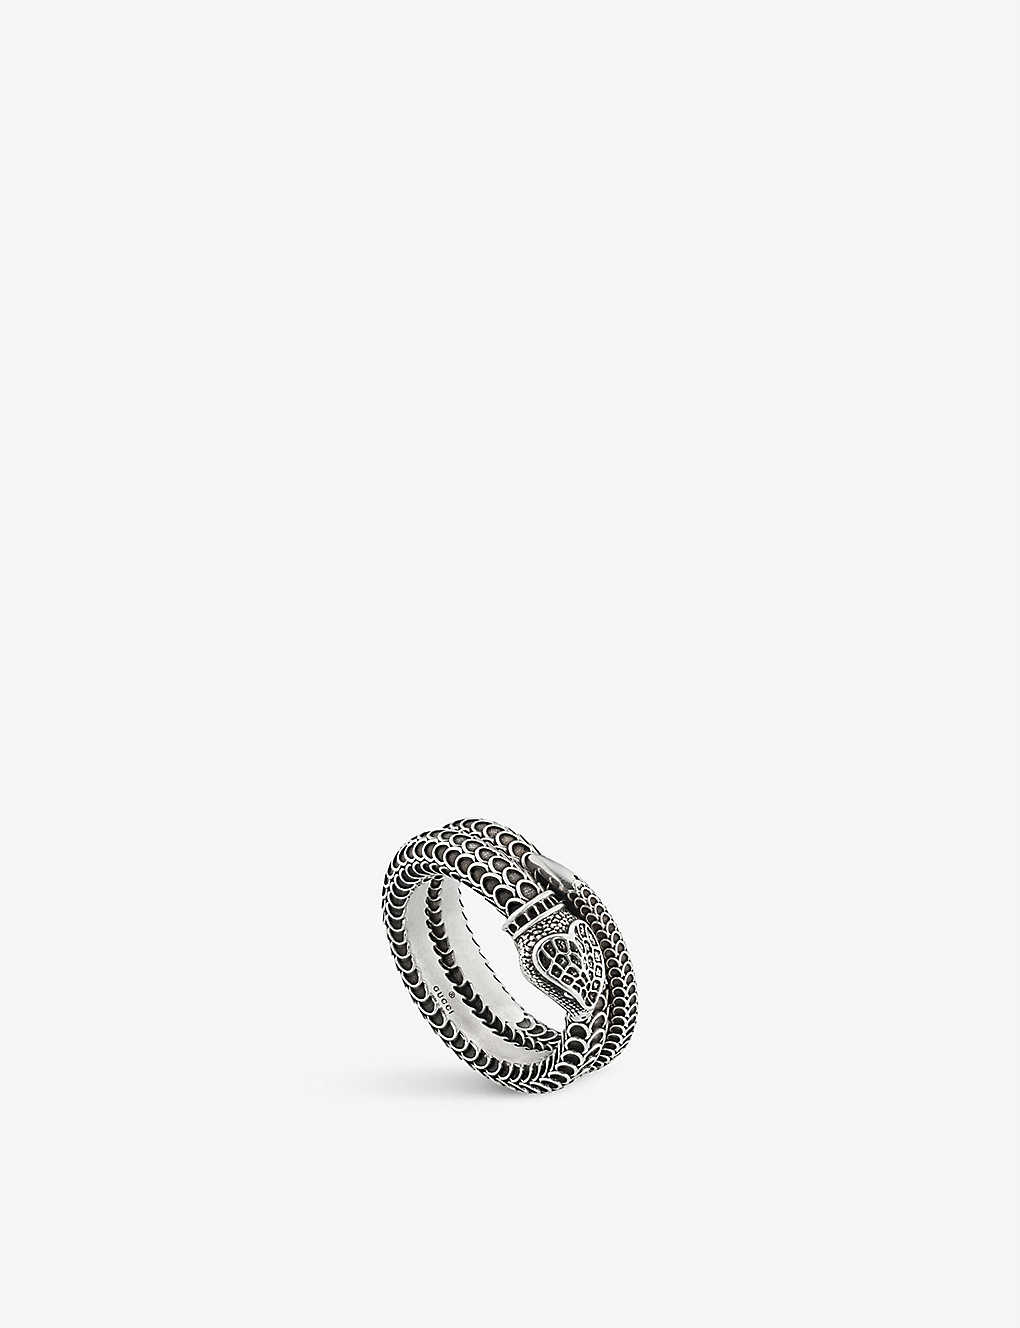 Gucci Garden snake engraved sterling silver ring(8138177)